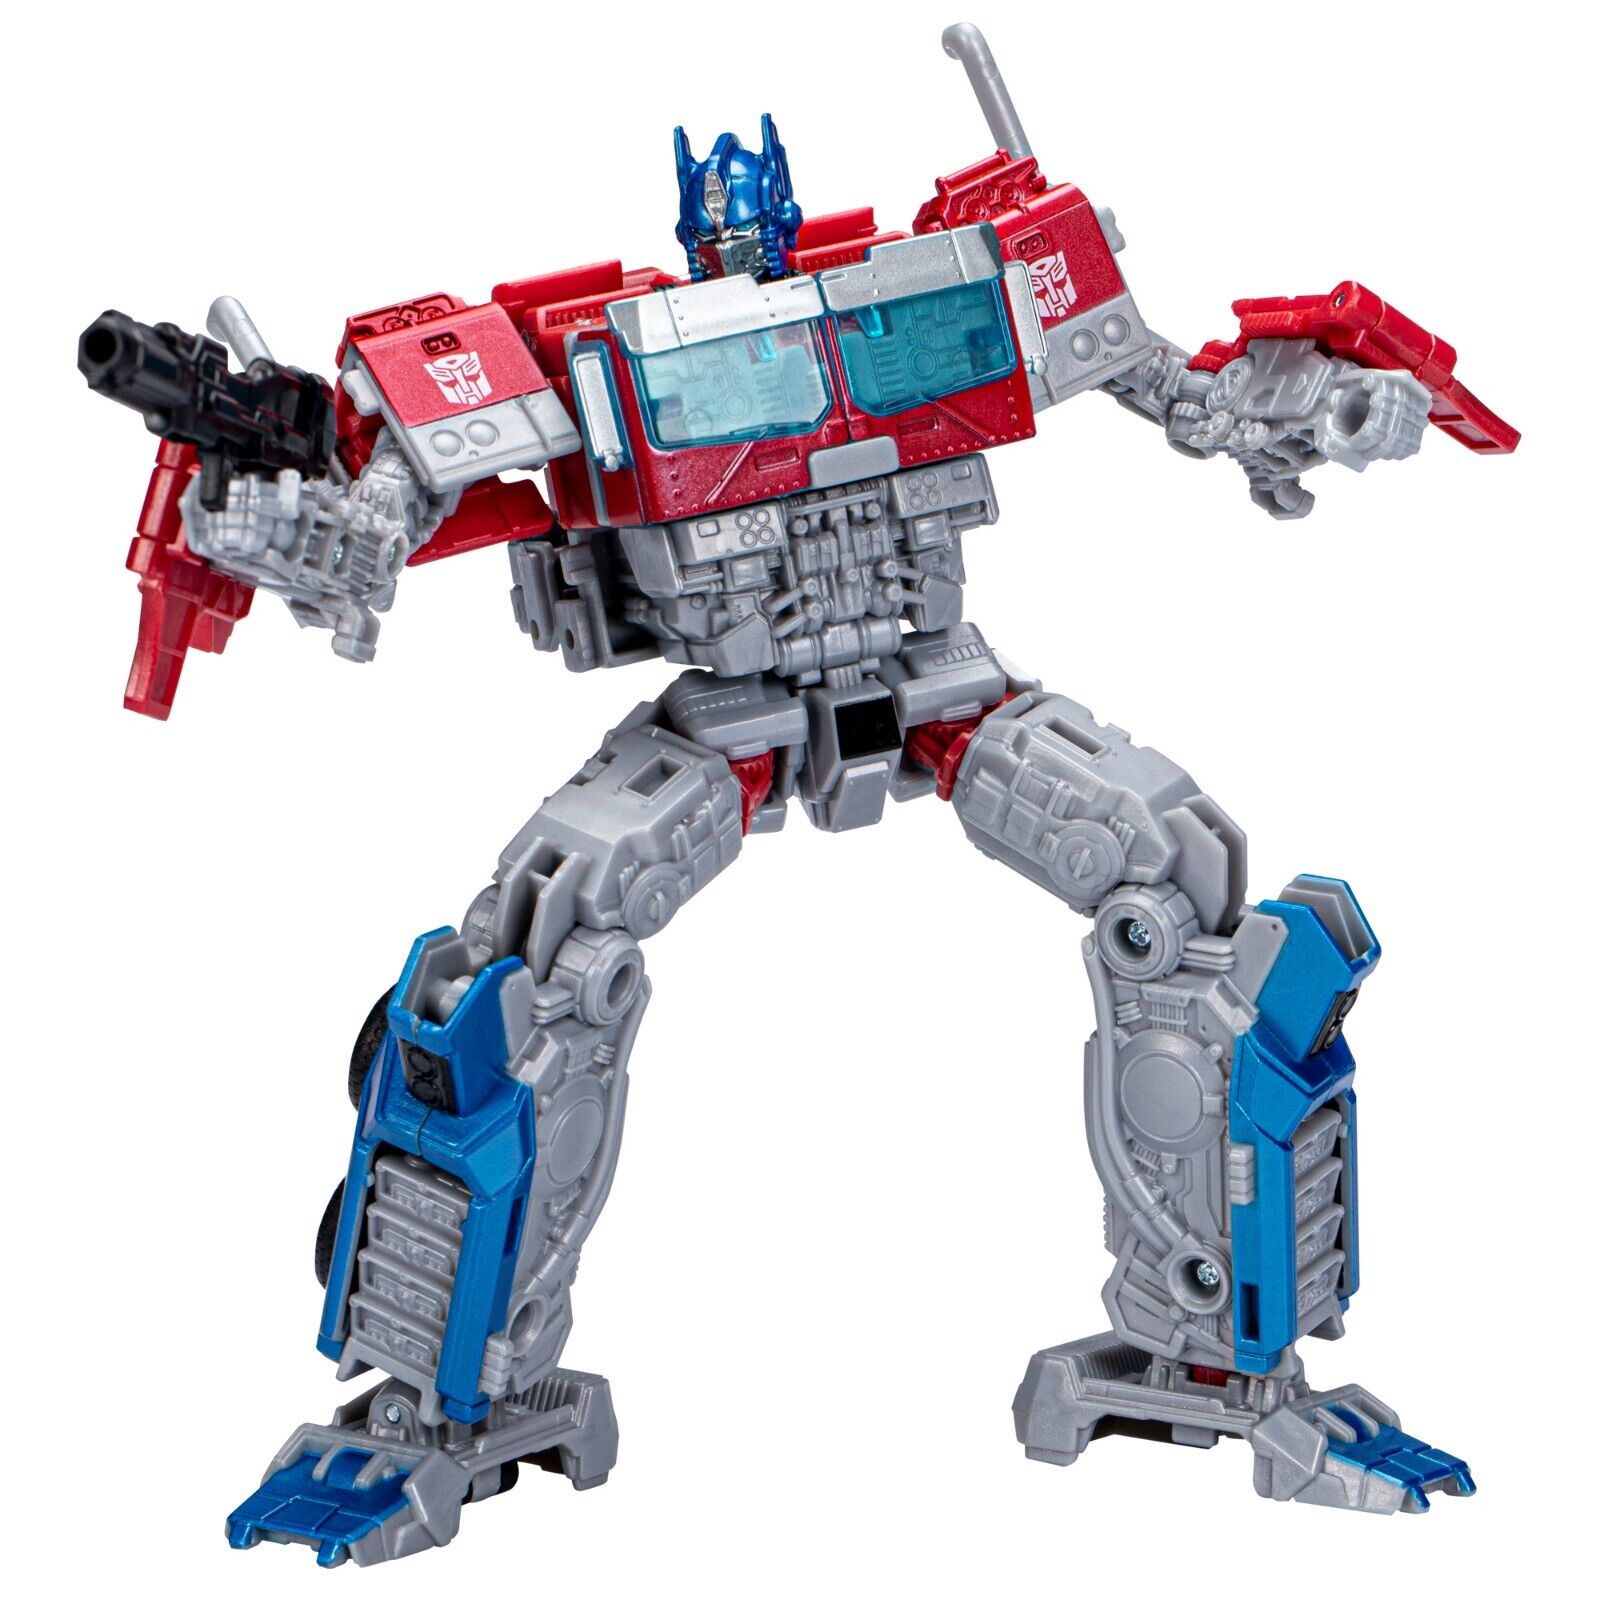 Transformers Rise of the Beasts Voyager Optimus Prime Action Figure by Hasbro -Hasbro - India - www.superherotoystore.com